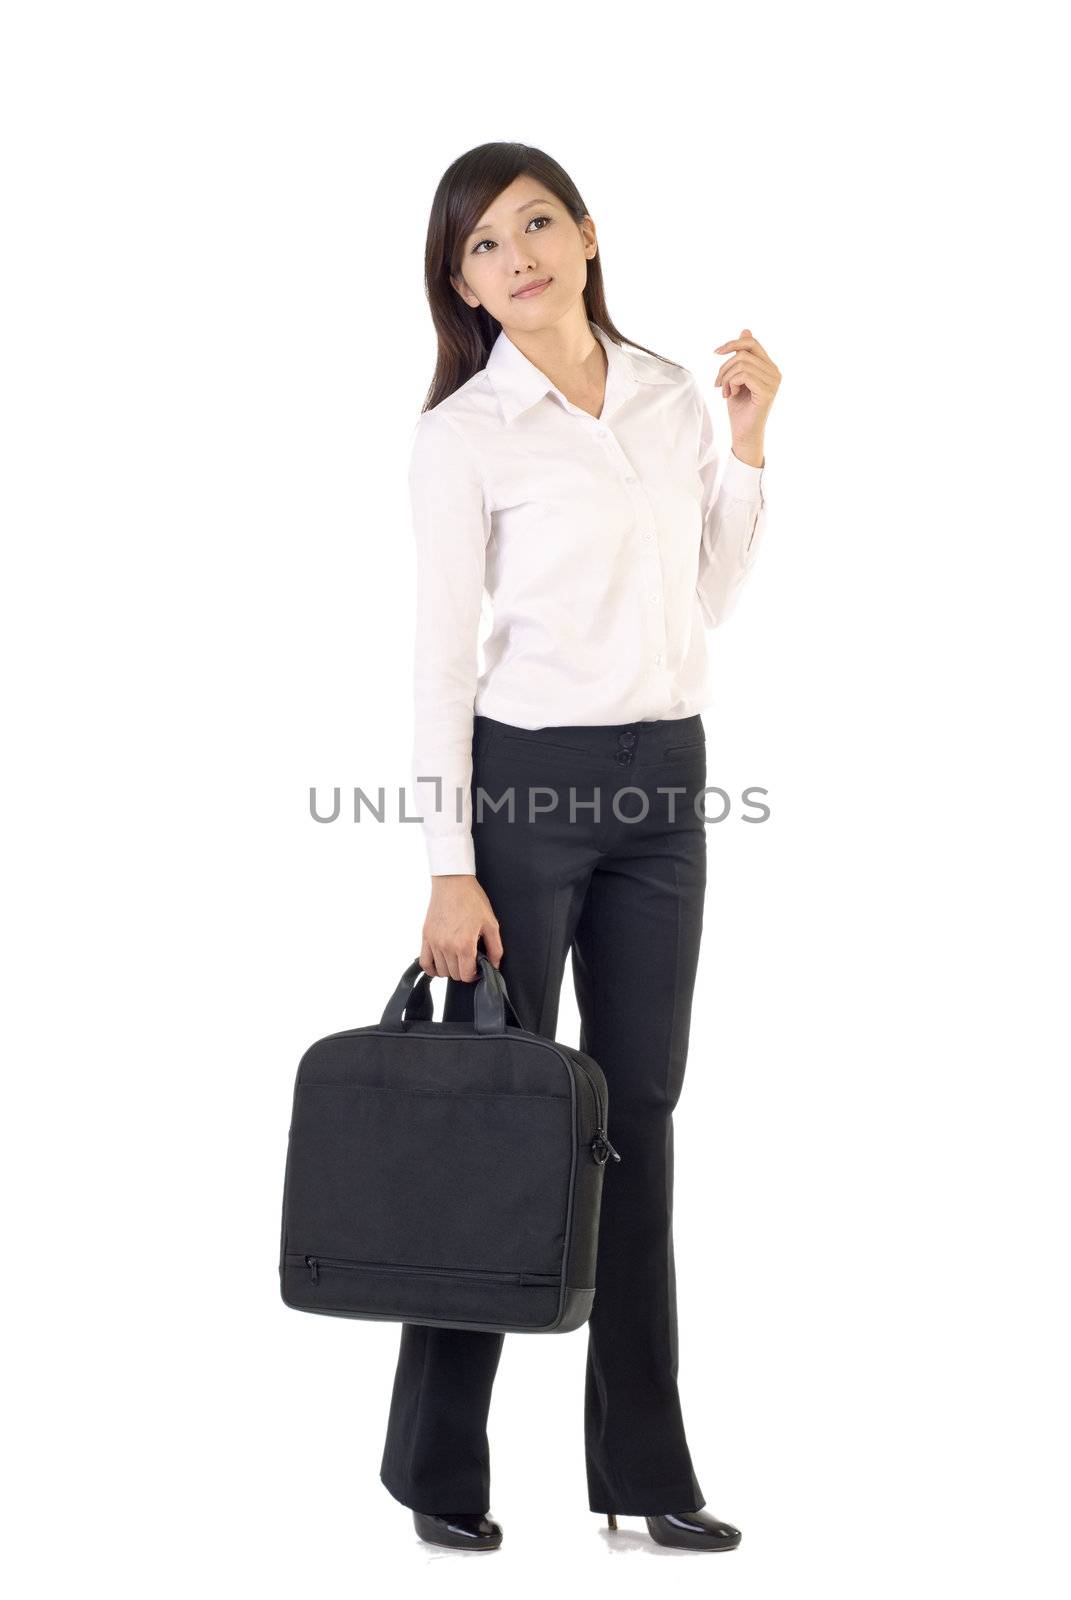 Portrait of Asian business woman with briefcase standing on white background.